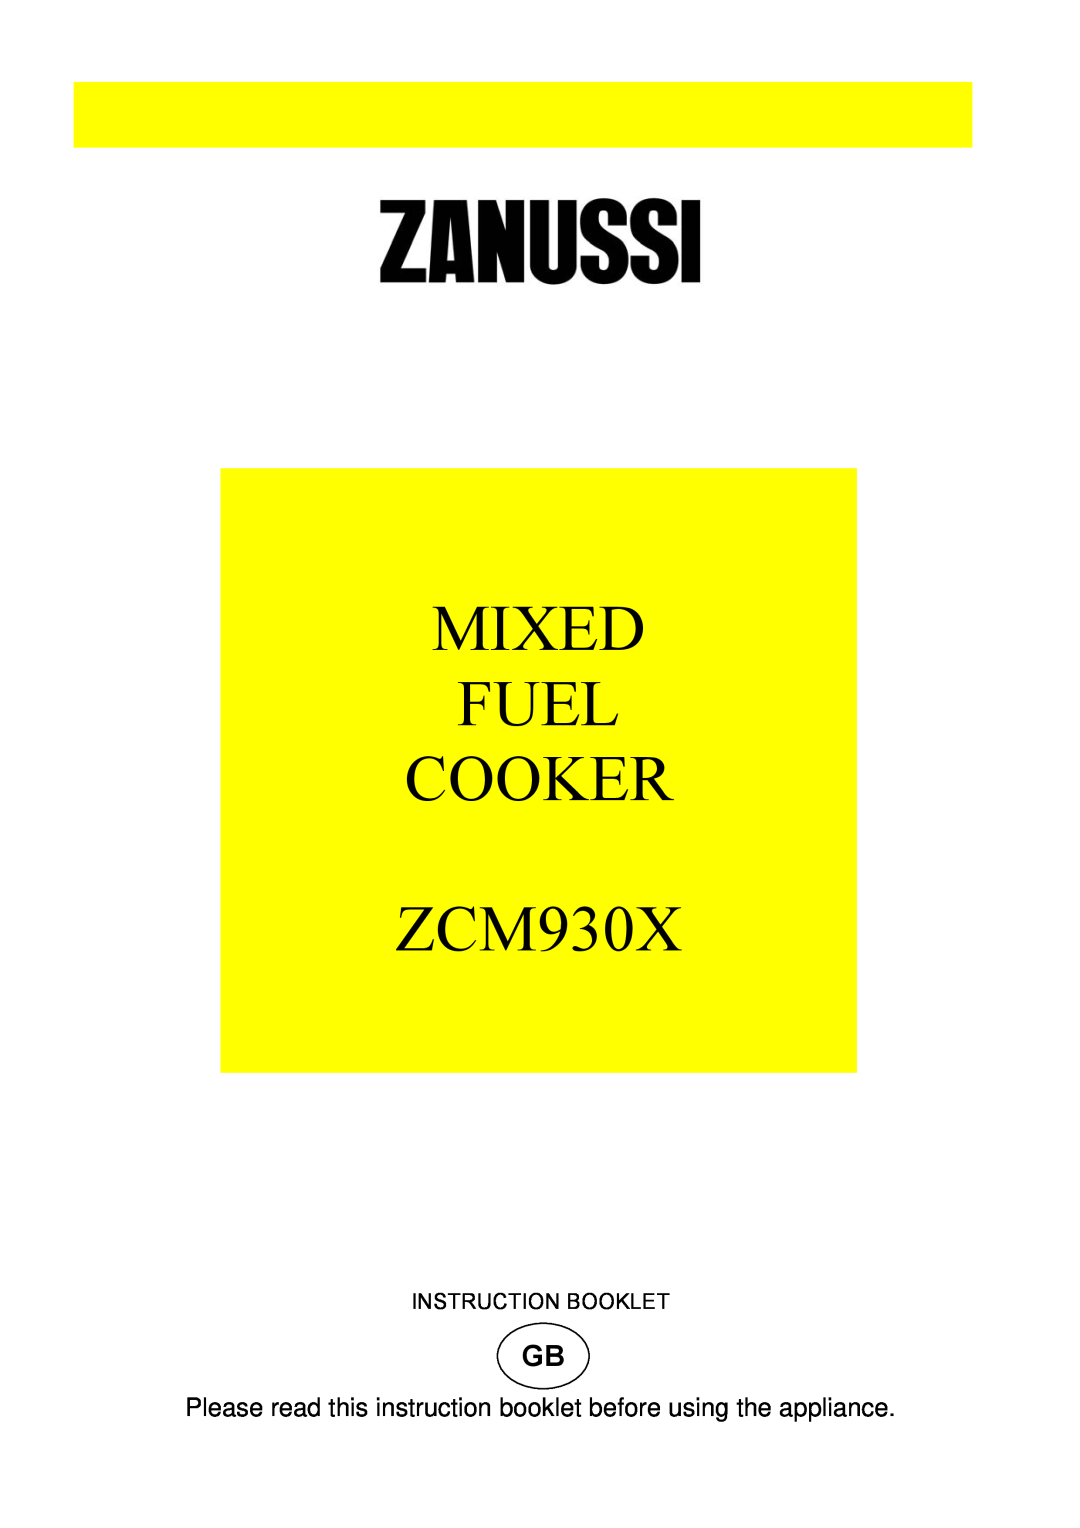 Zanussi manual MIXED FUEL COOKER ZCM930X, Please read this instruction booklet before using the appliance 